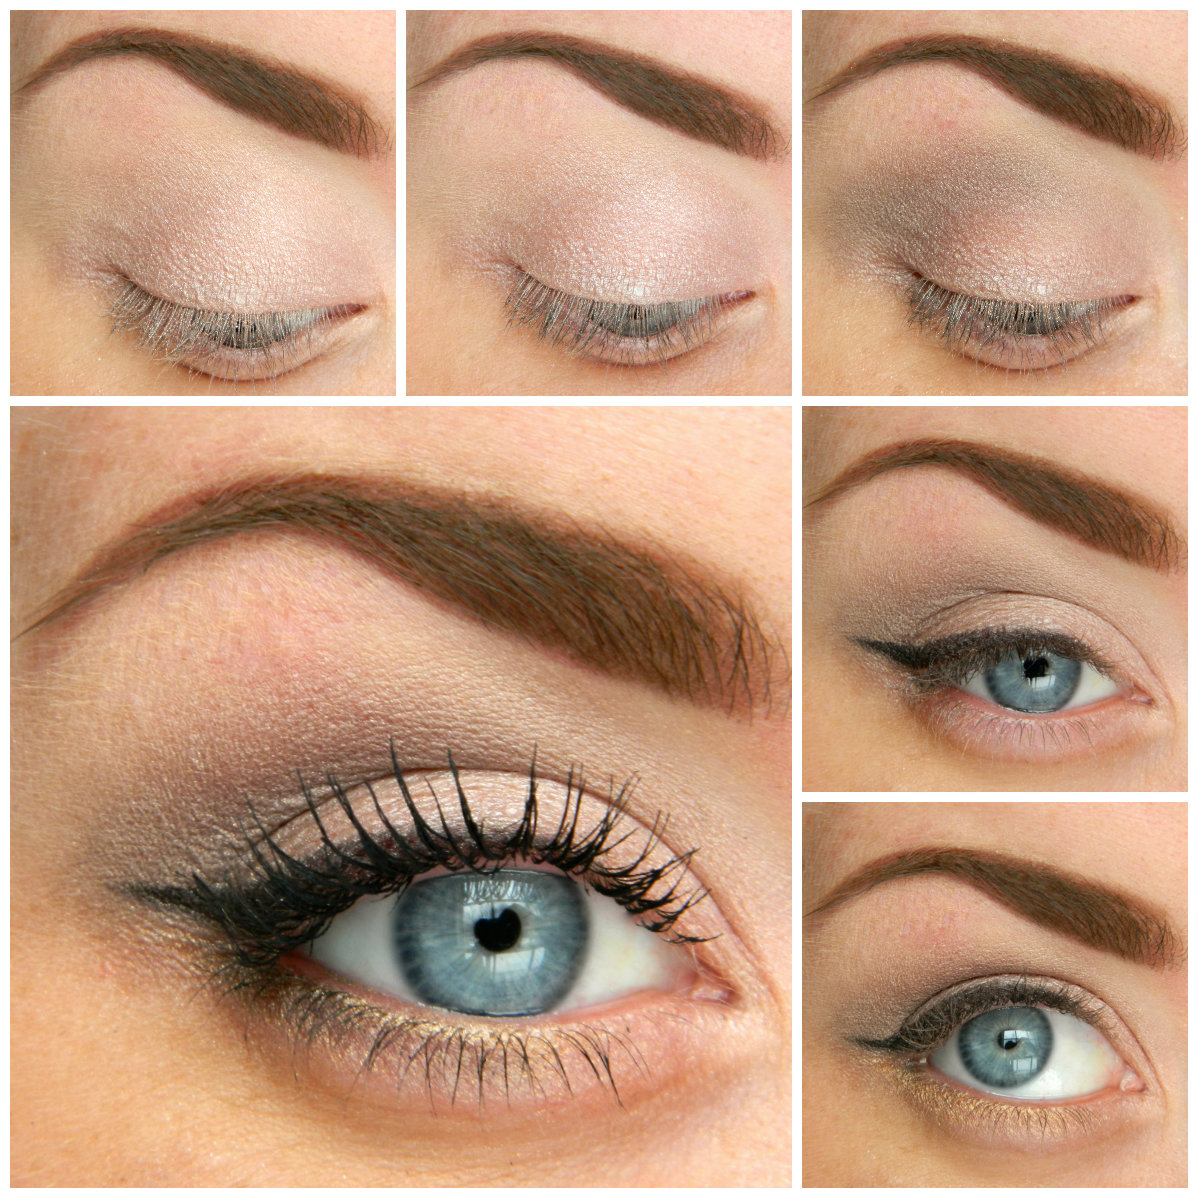 How To Do Makeup For Blue Eyes 5 Ways To Make Blue Eyes Pop With Proper Eye Makeup Her Style Code